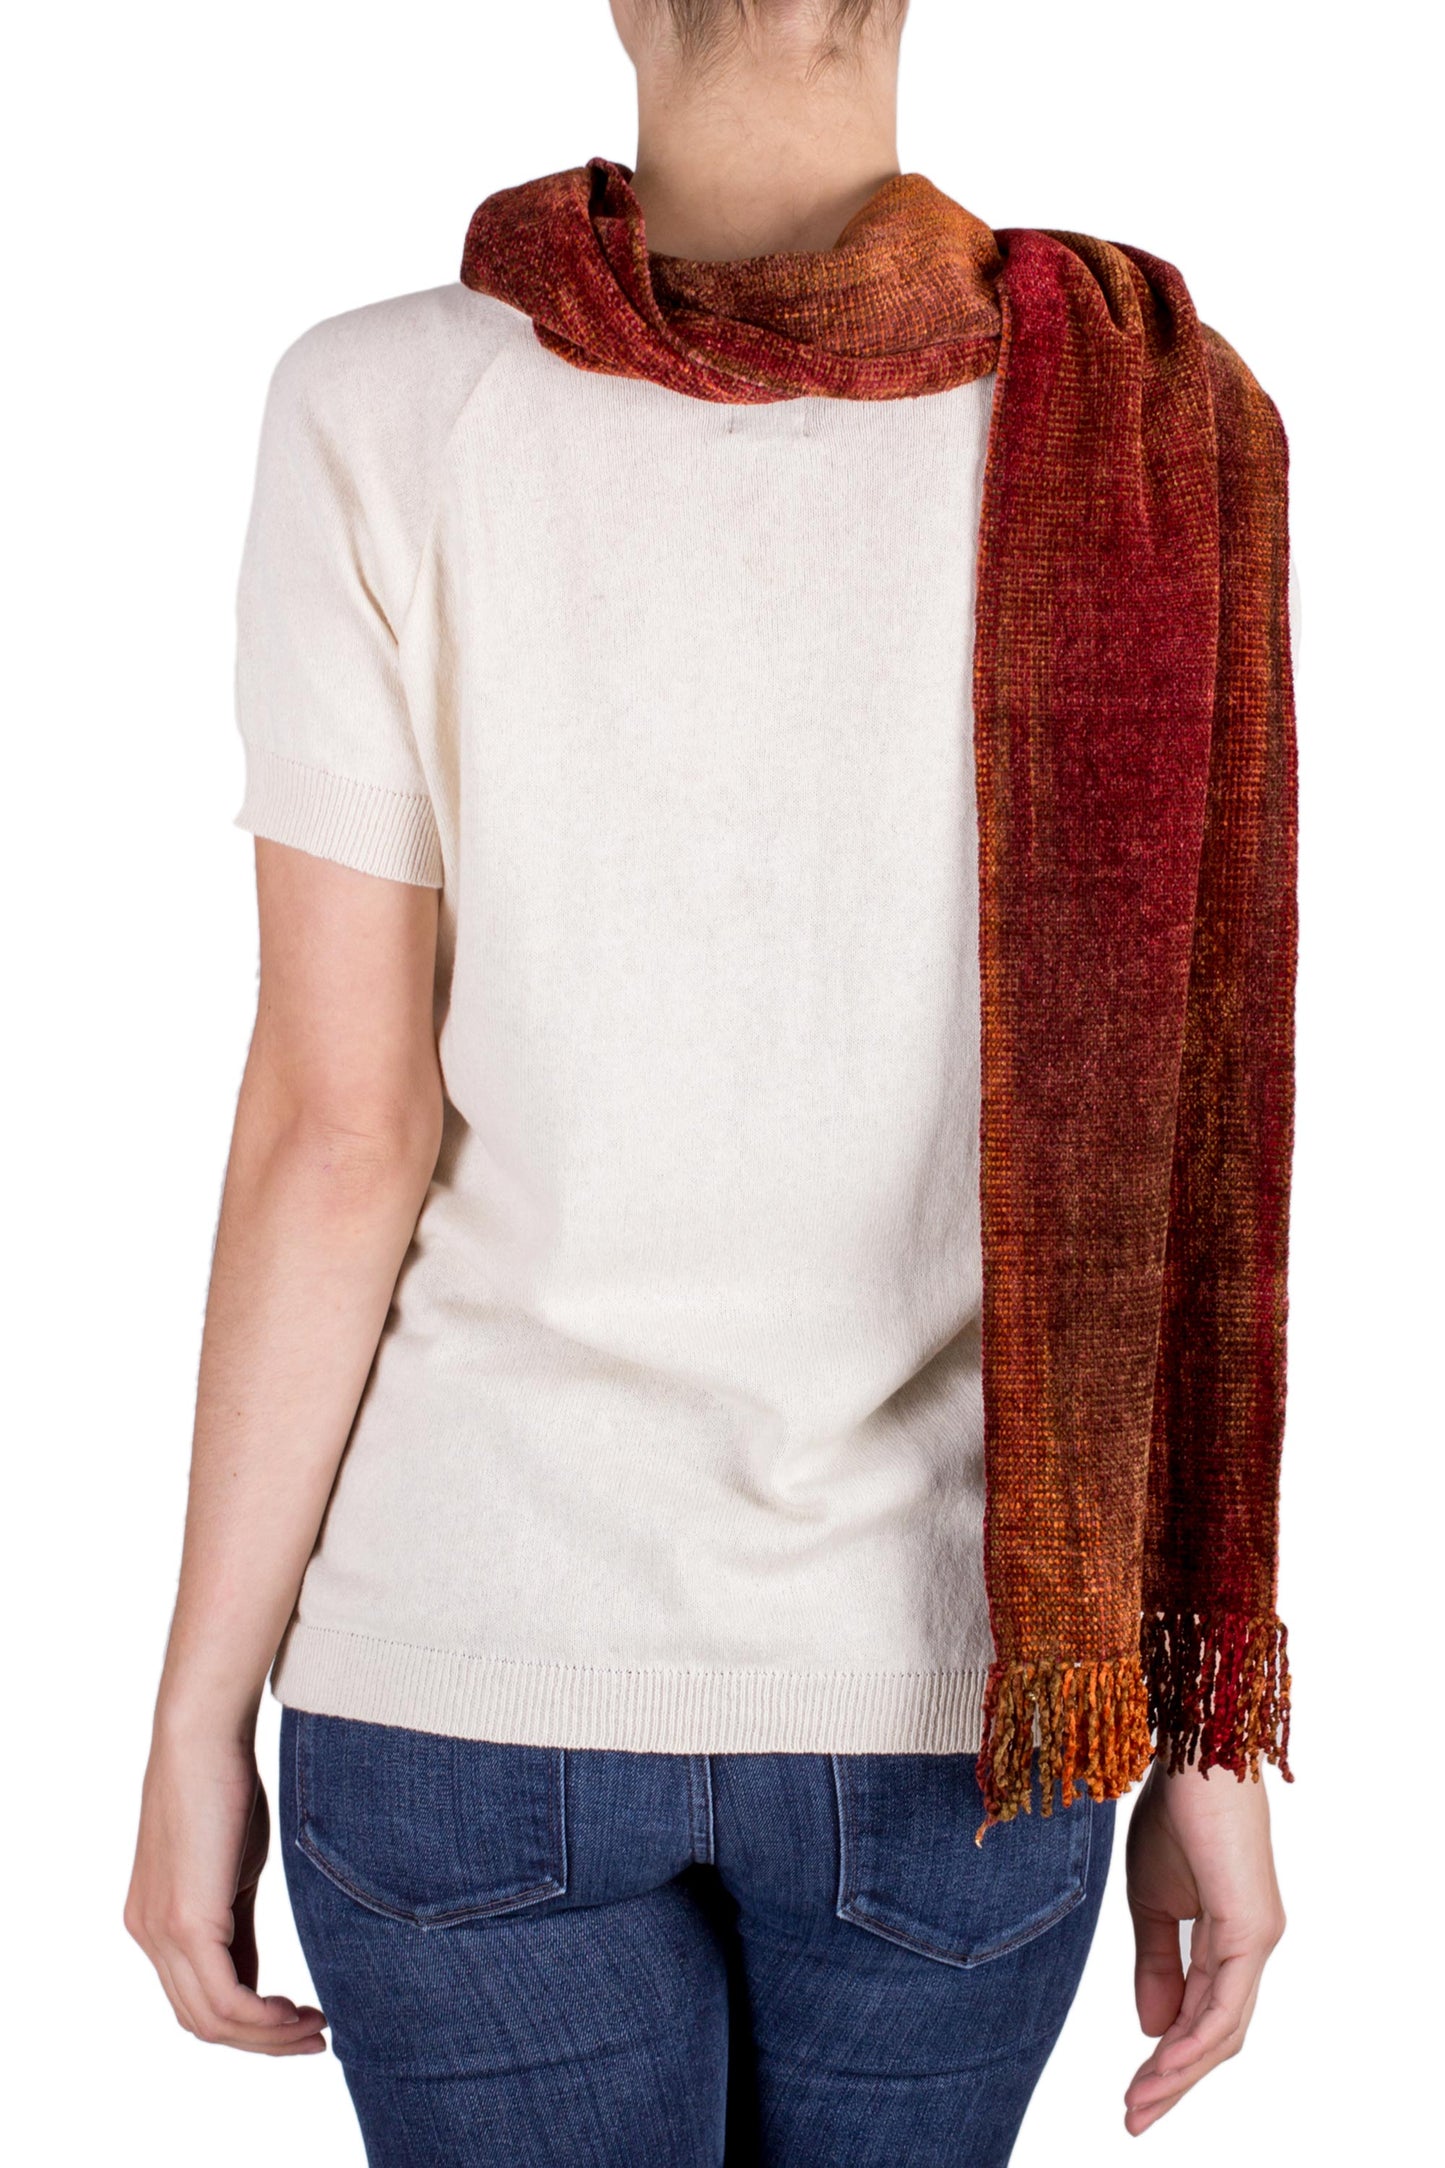 Orange Dreamer Handwoven Rayon Scarf in Orange and Red from Guatemala